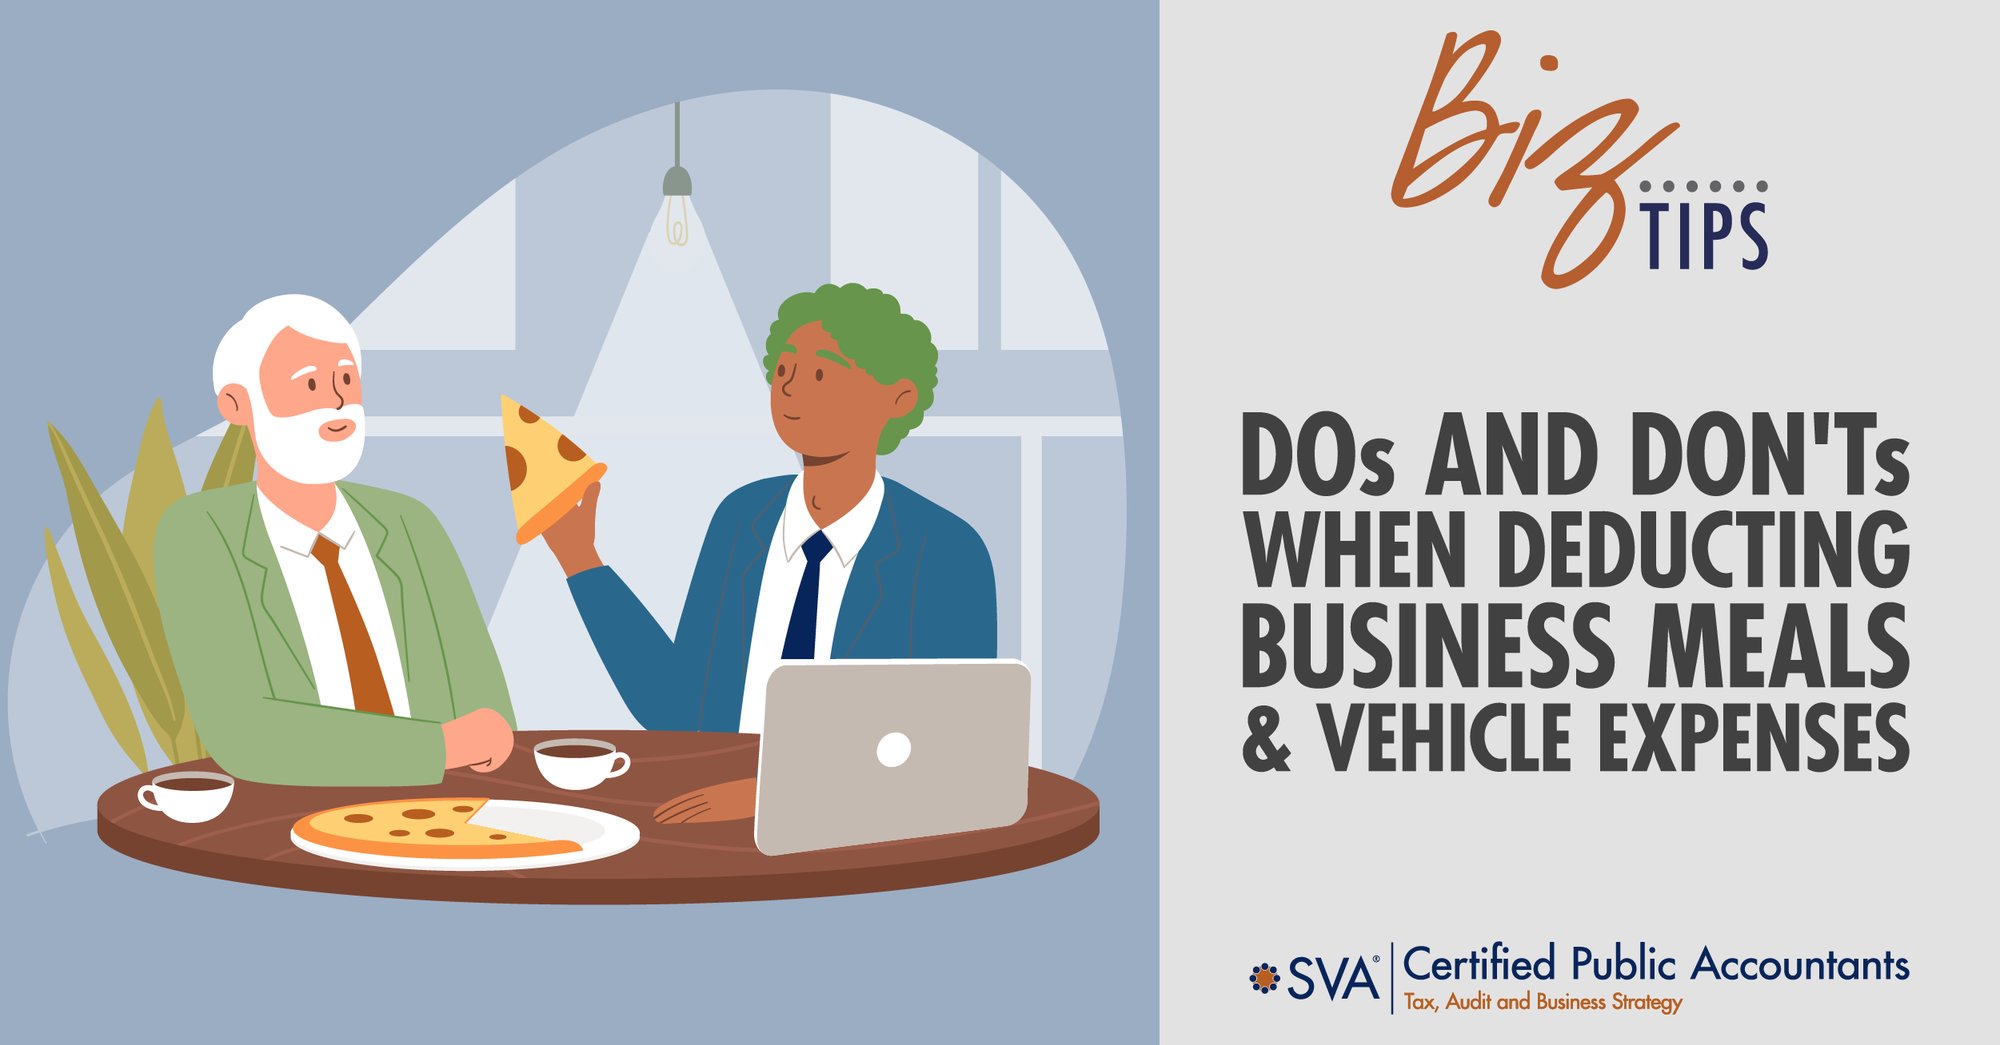 sva-certified-public-accountants-biz-tips-dos-and-donts-when-deducting-business-meals-and-vehicle-expenses-1